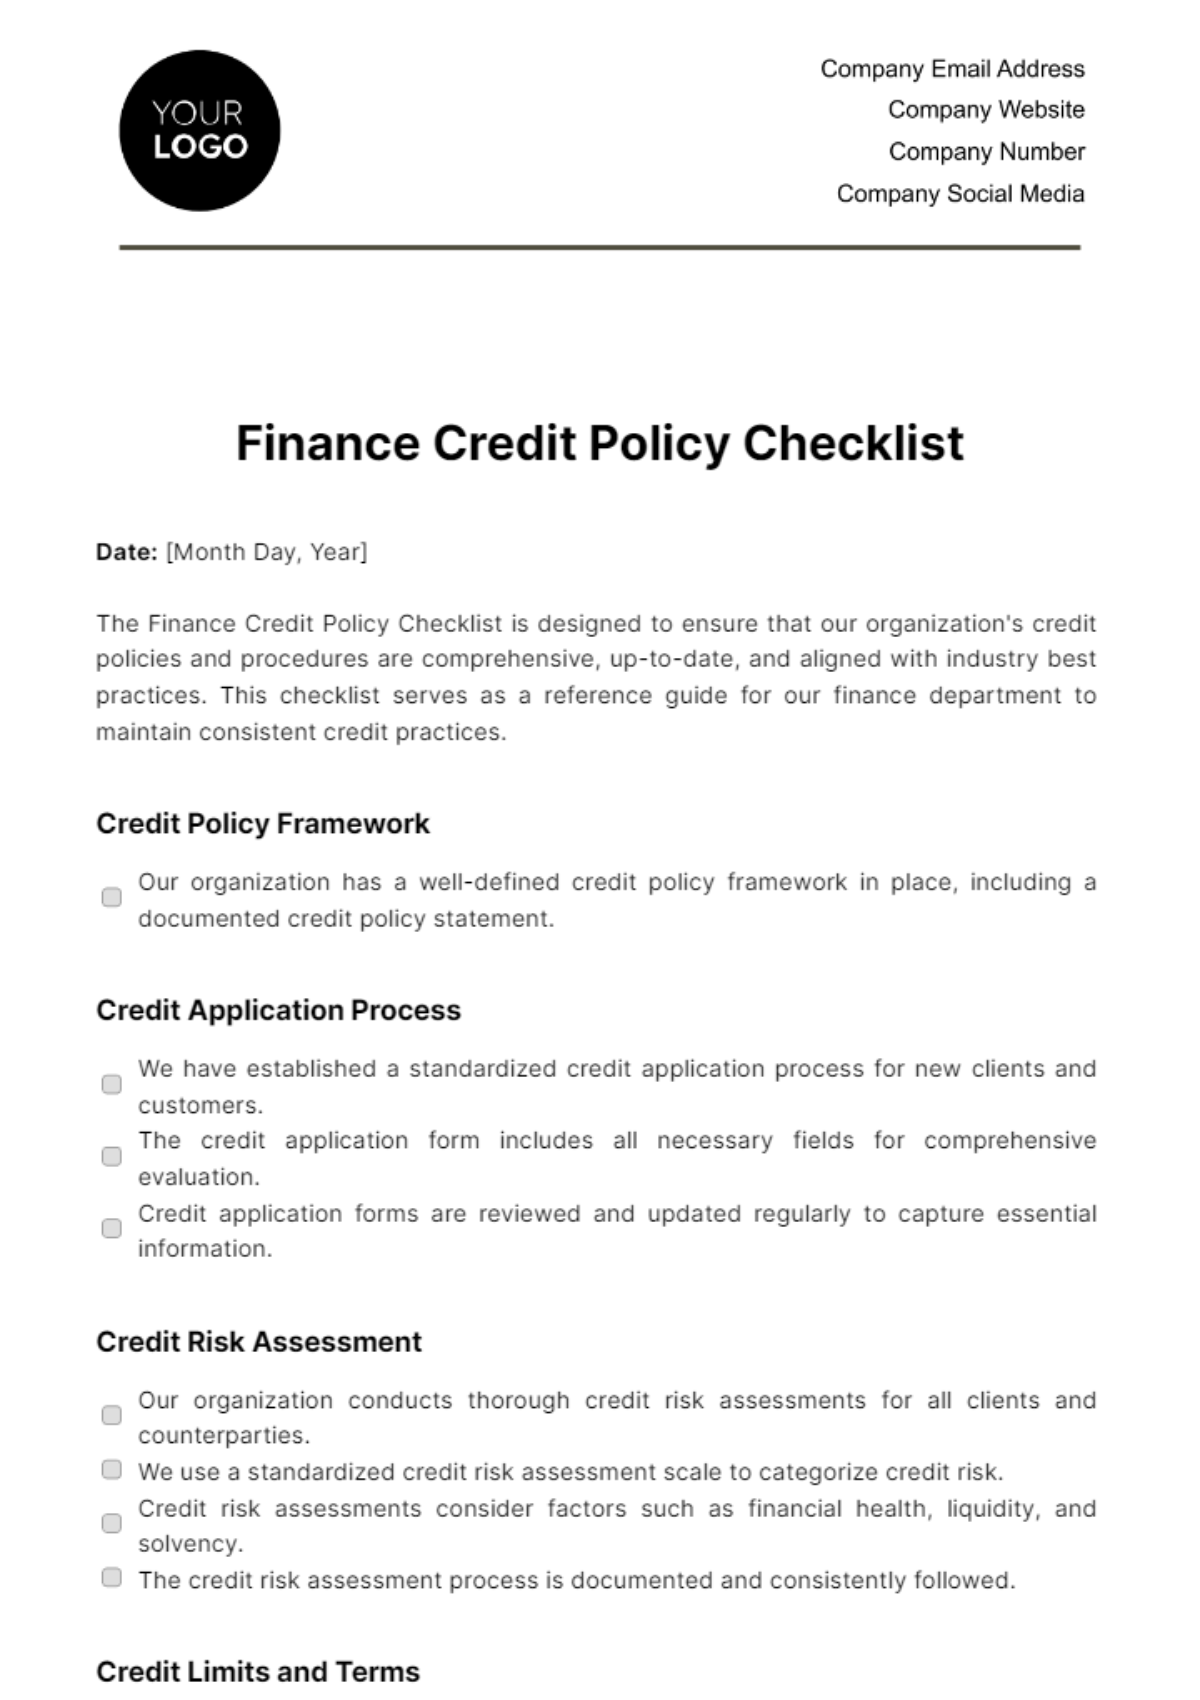 Finance Credit Policy Checklist Template